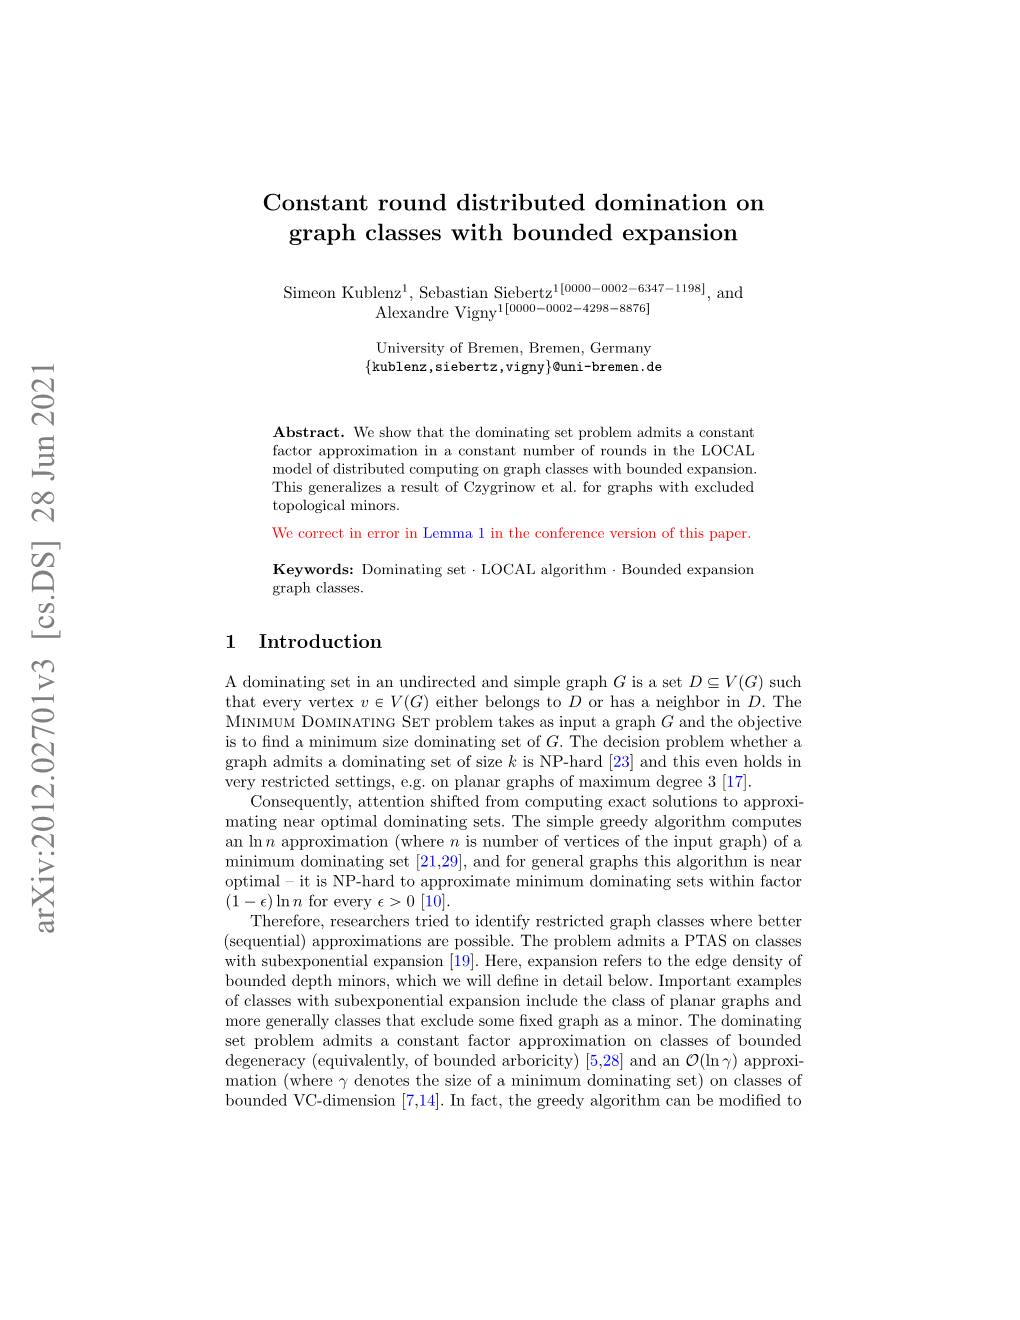 Arxiv:2012.02701V3 [Cs.DS] 28 Jun 2021 (Sequential) Approximations Are Possible